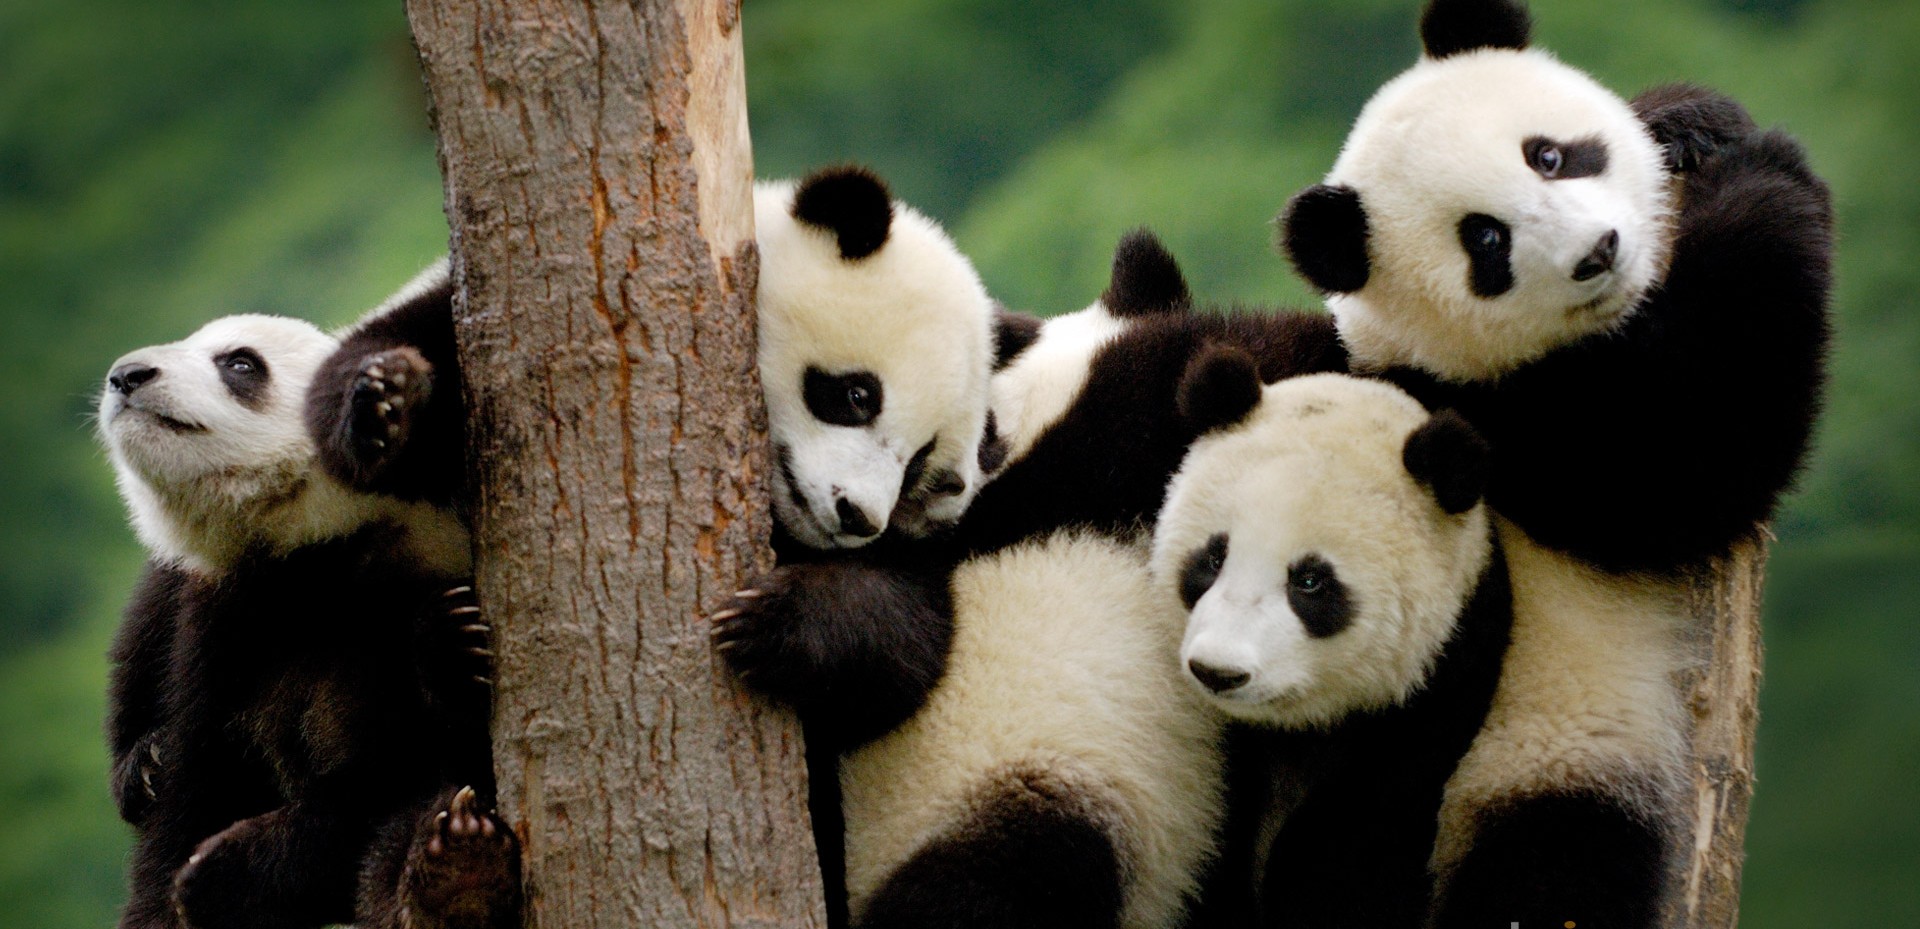 The company of pandas in the zoo